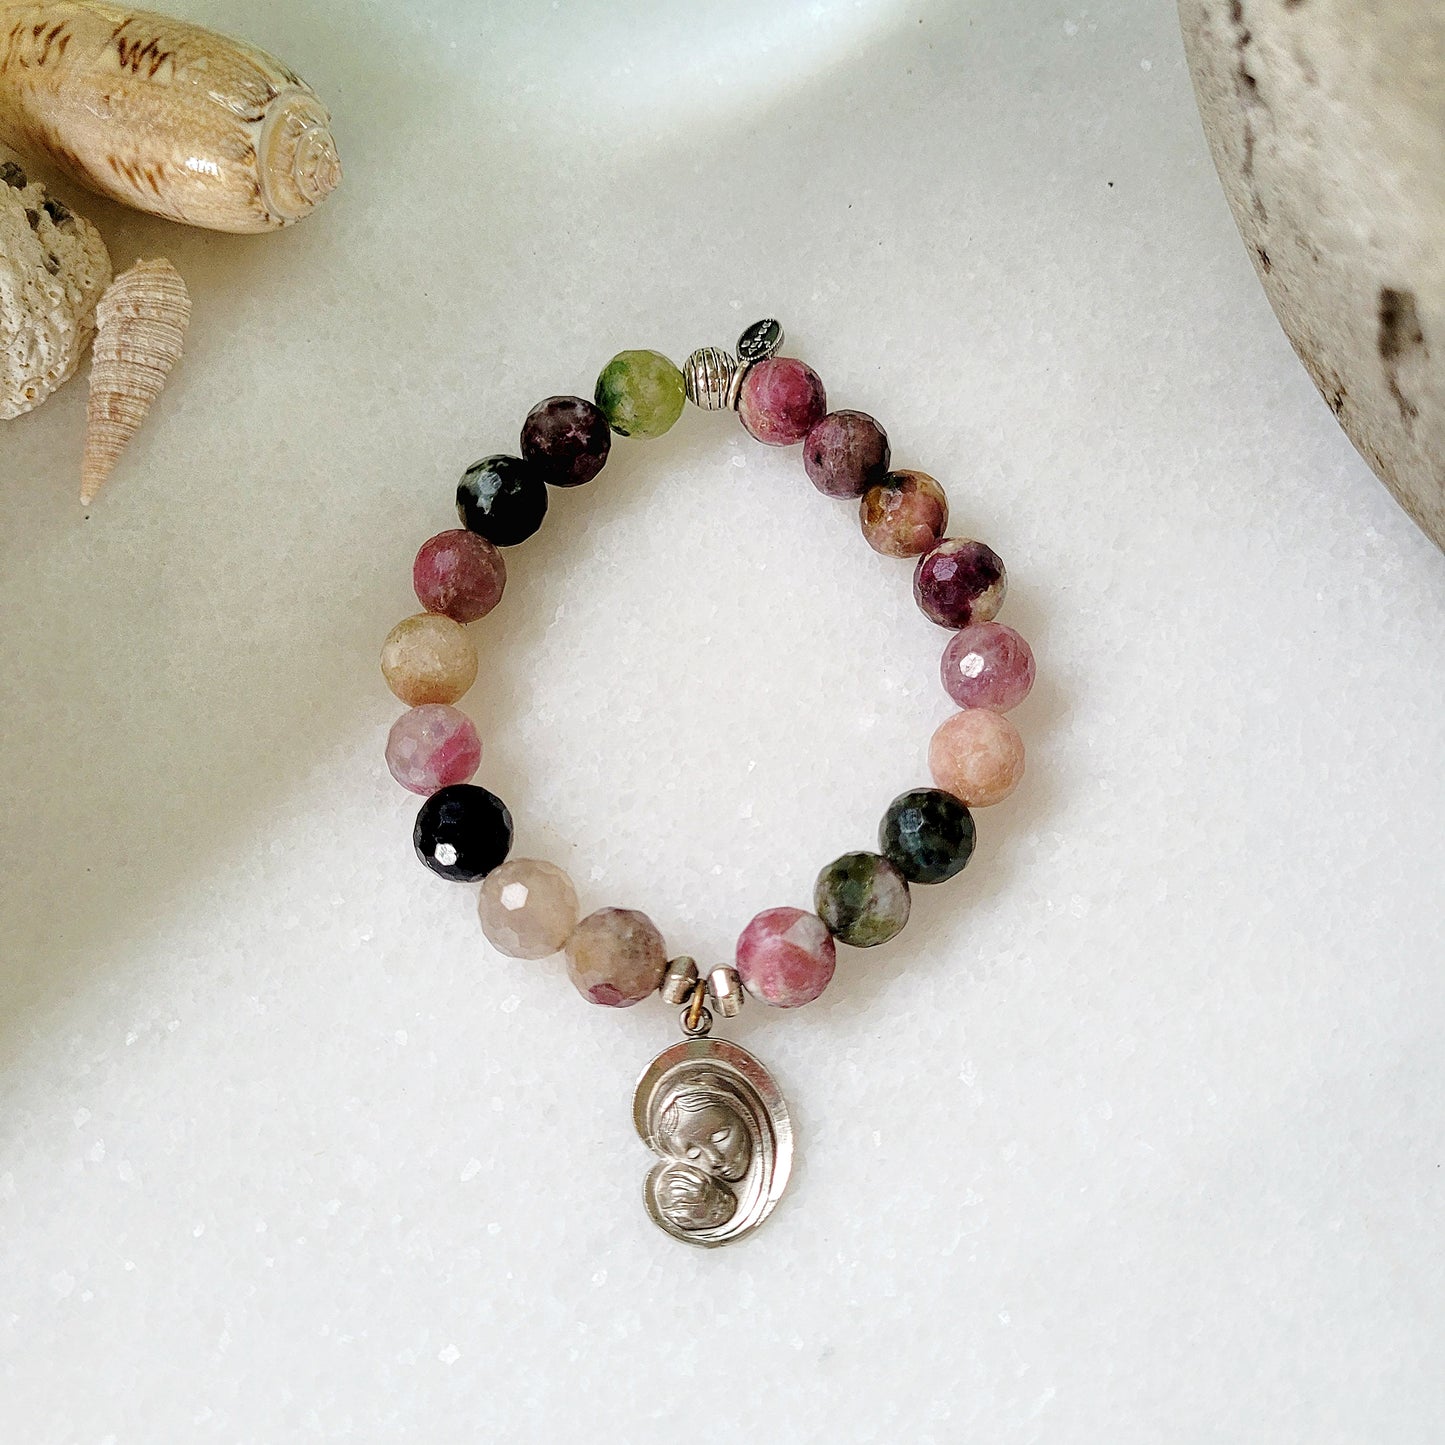 Red Sapphire Faceted 10mm Beaded Bracelet w/ Blessed Mother Mary + Child Jesus Sterling Silver Medal